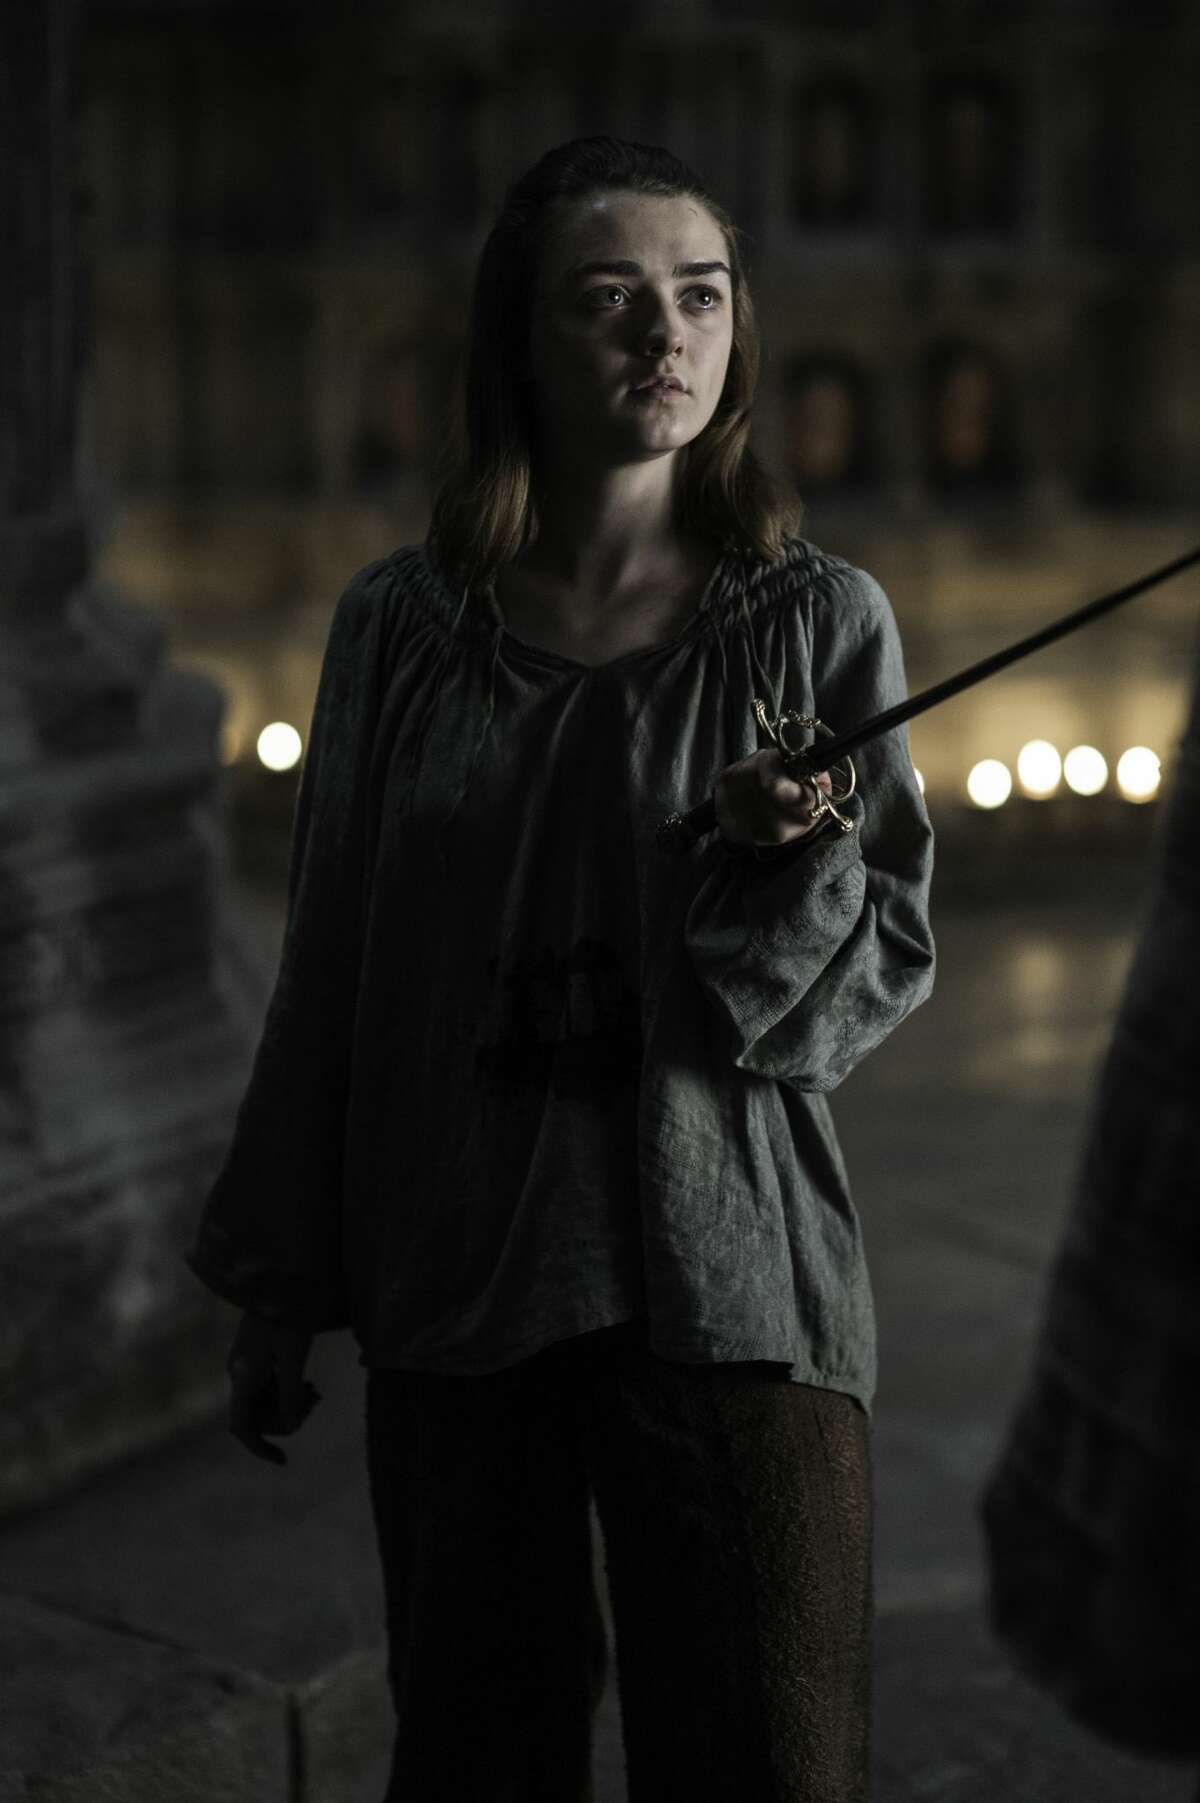 Maisie Williams as Arya Stark in HBO's "Game of Thrones."